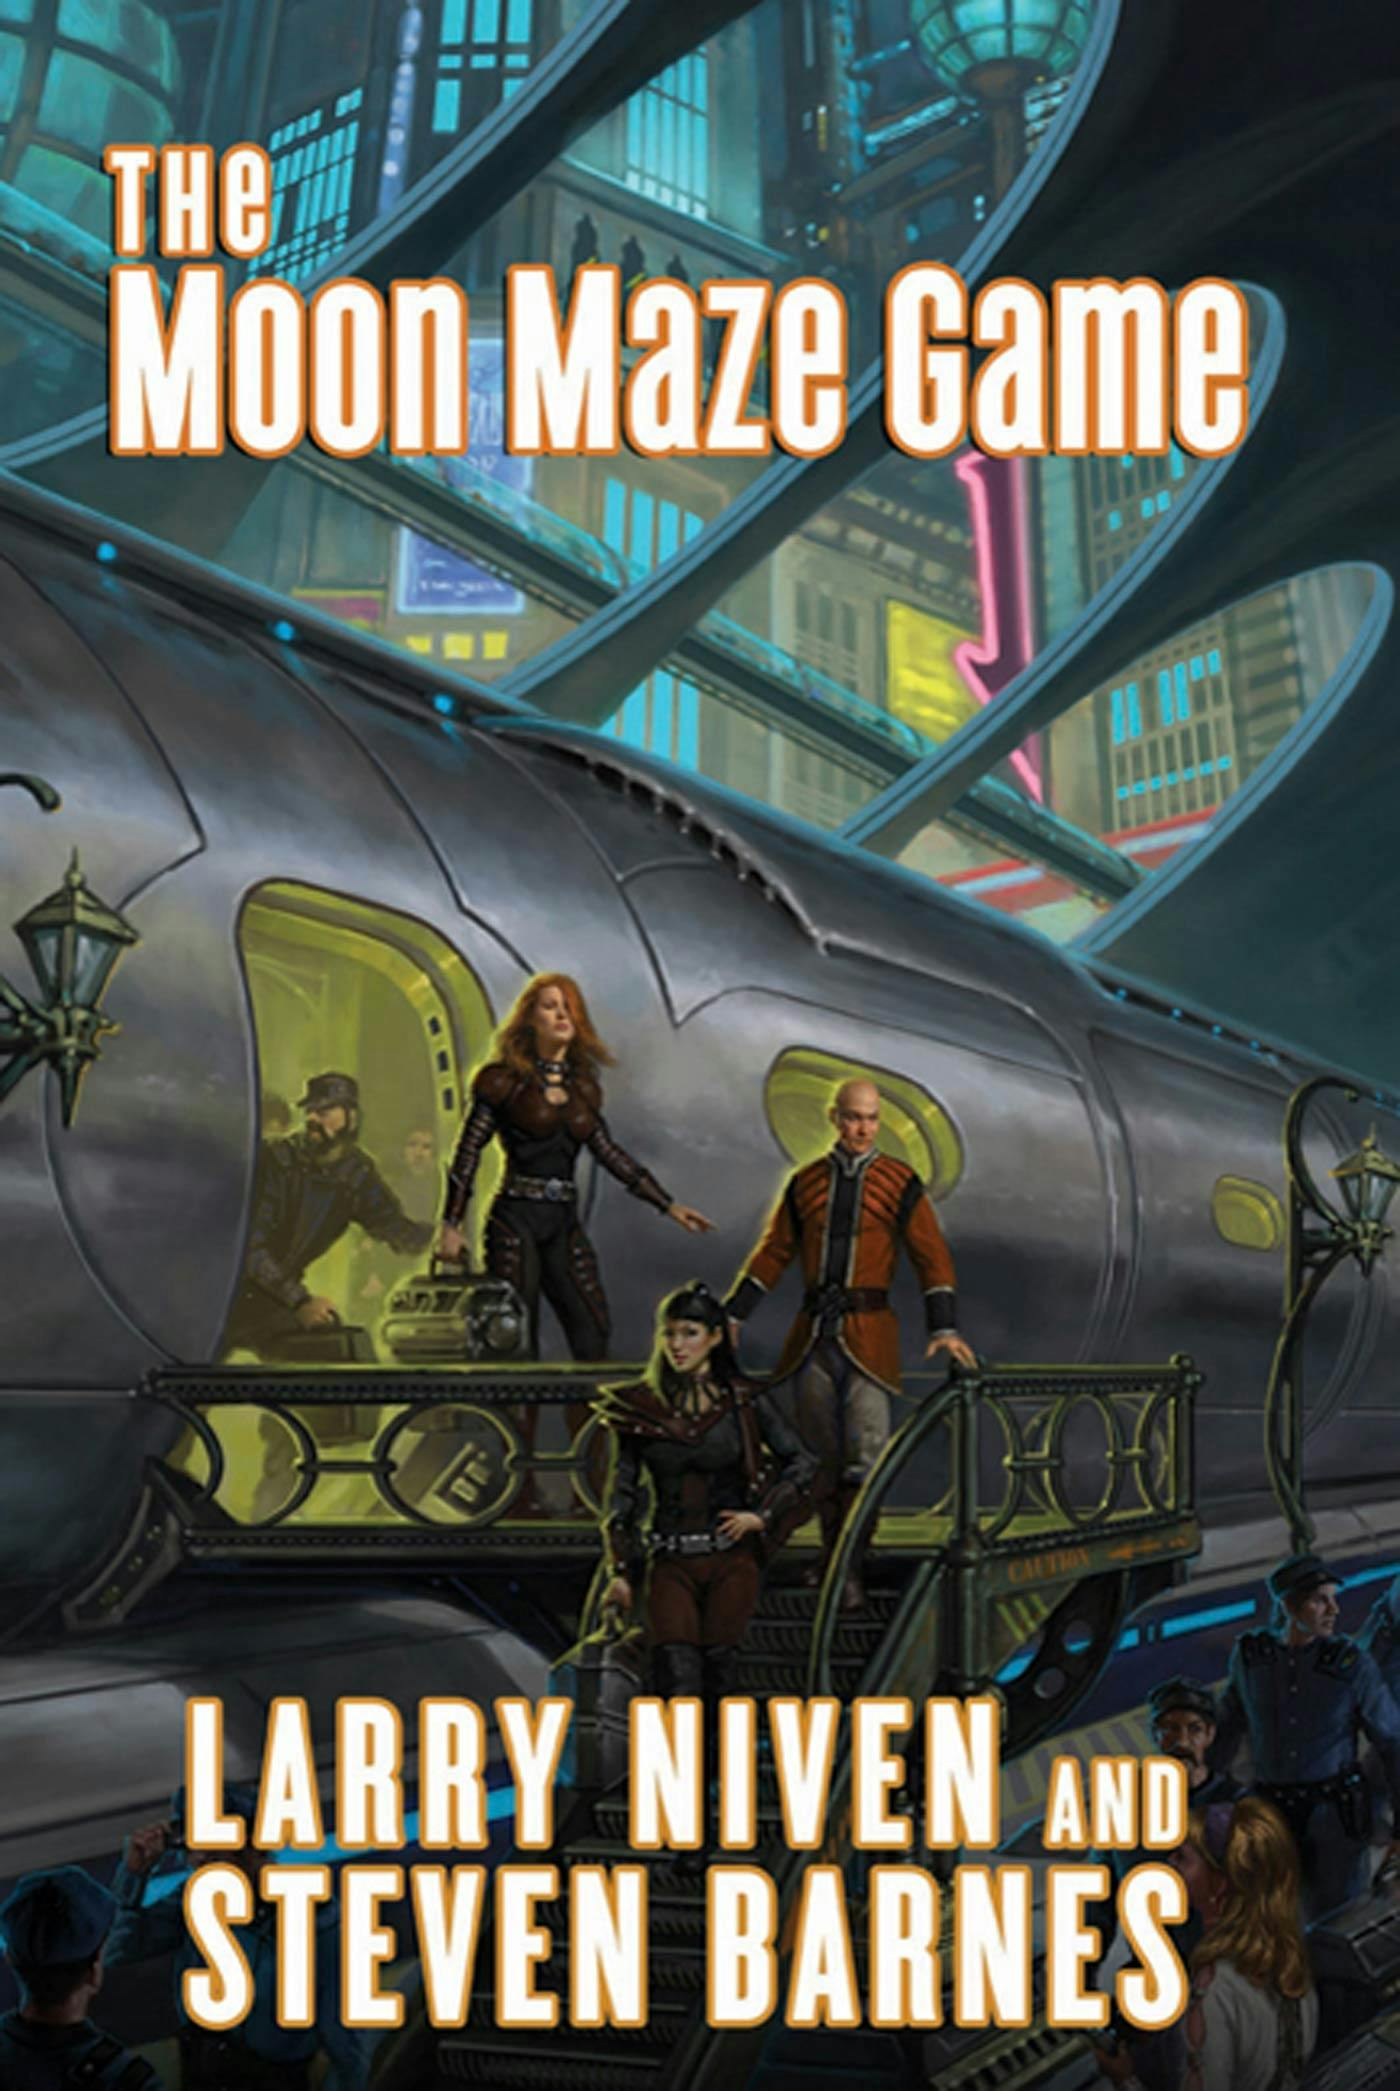 Cover for the book titled as: The Moon Maze Game